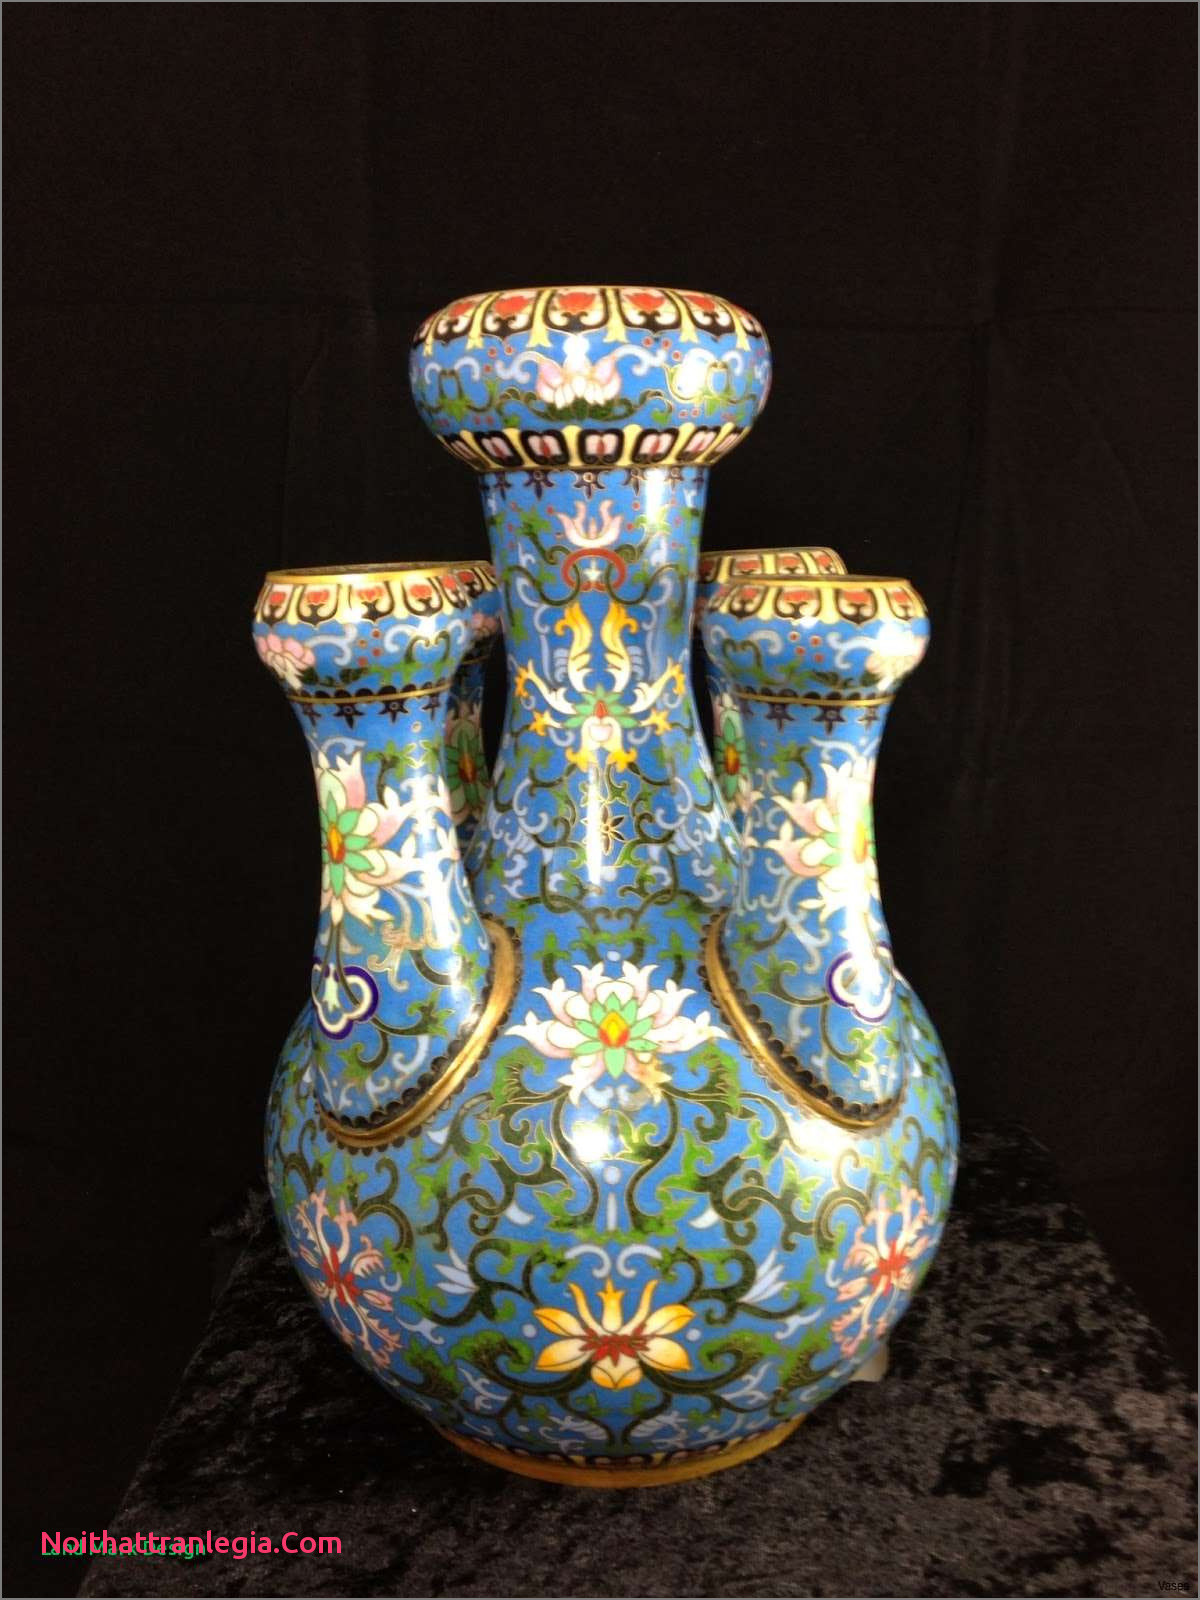 23 Awesome Cloisonne Vase Marks 2024 free download cloisonne vase marks of 20 chinese antique vase noithattranlegia vases design throughout 213 1h vases antique asian the increased trade of chinese ware during 16th century has significantly